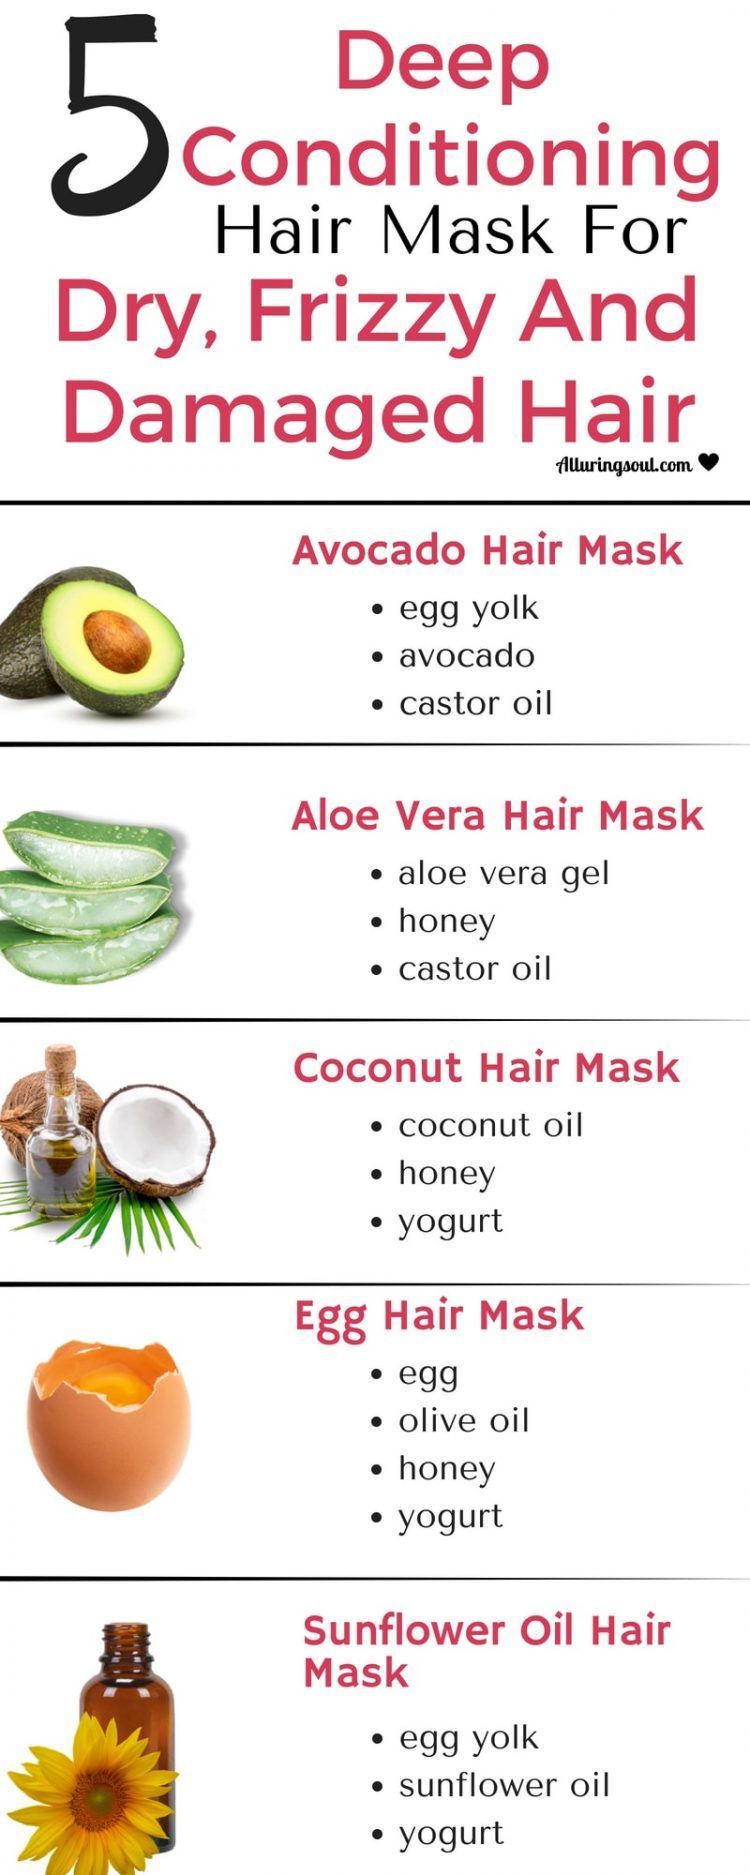 5 Deep Conditioning Hair Mask For Dry, Frizzy & Damaged Hair | Alluring Soul -   16 hair Care dry ideas